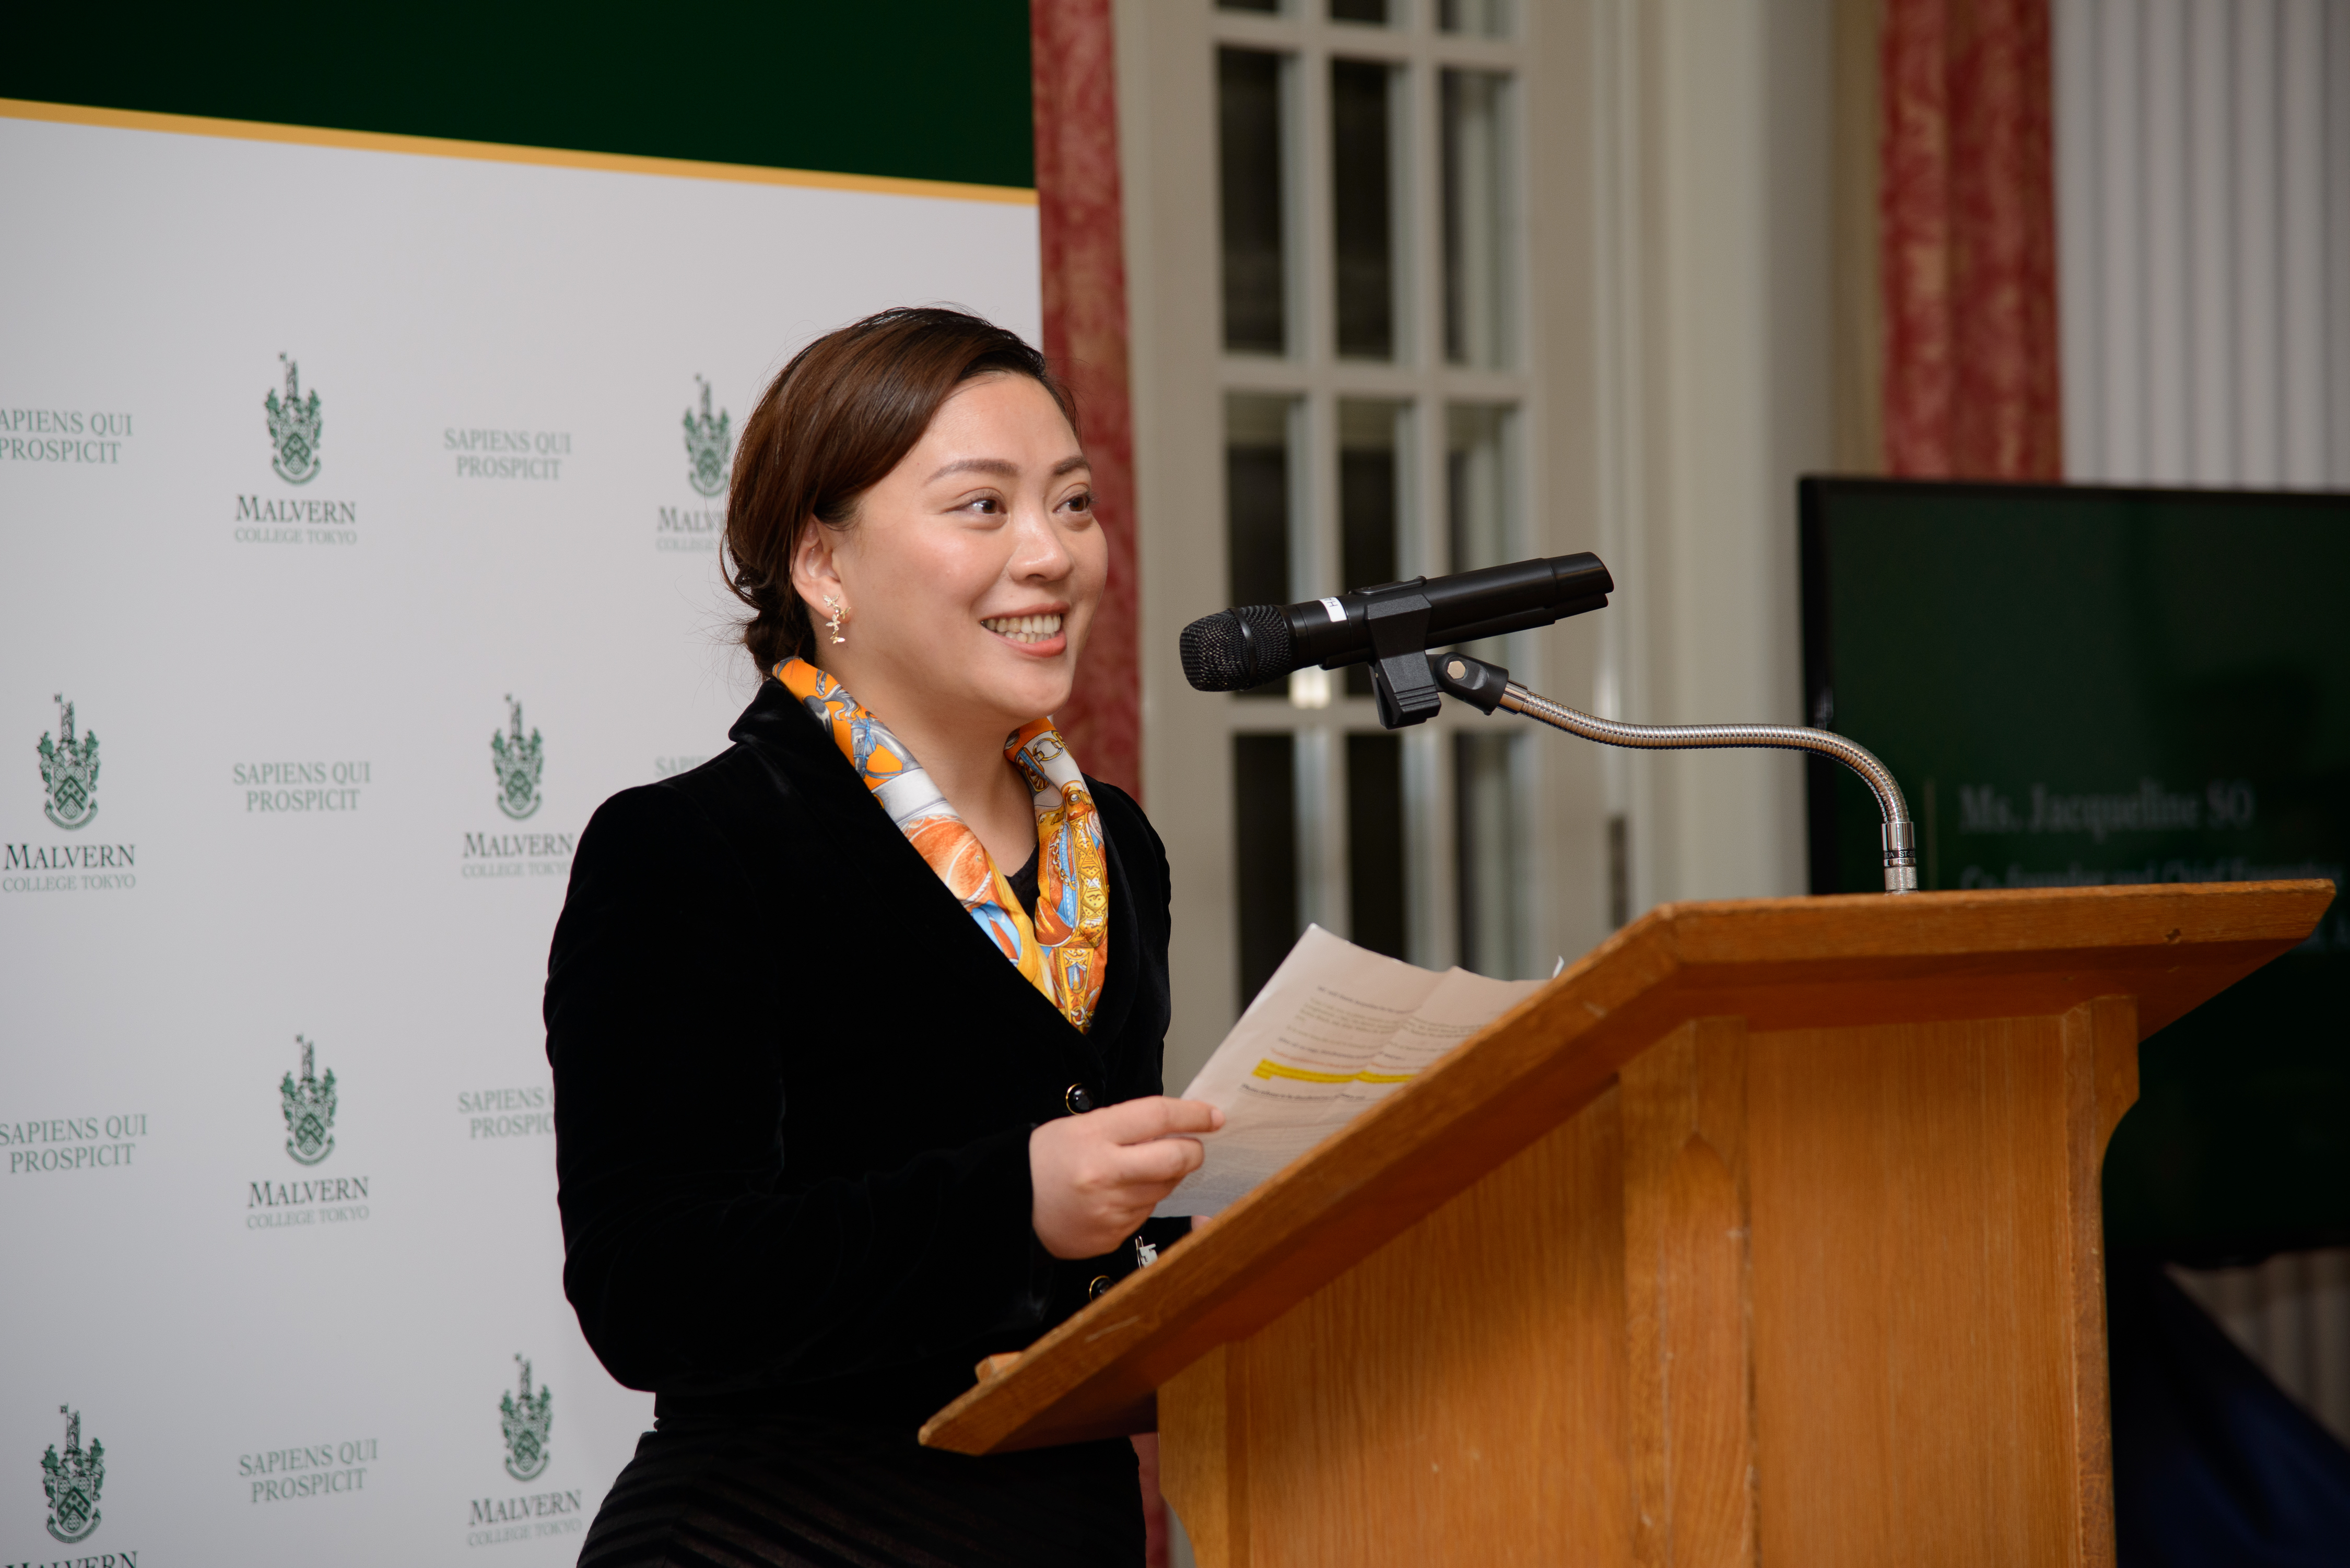 Ms Jacqueline So, Co-founder and Chief Executive of Malvern College International, Asia Pacific made a concluded speech